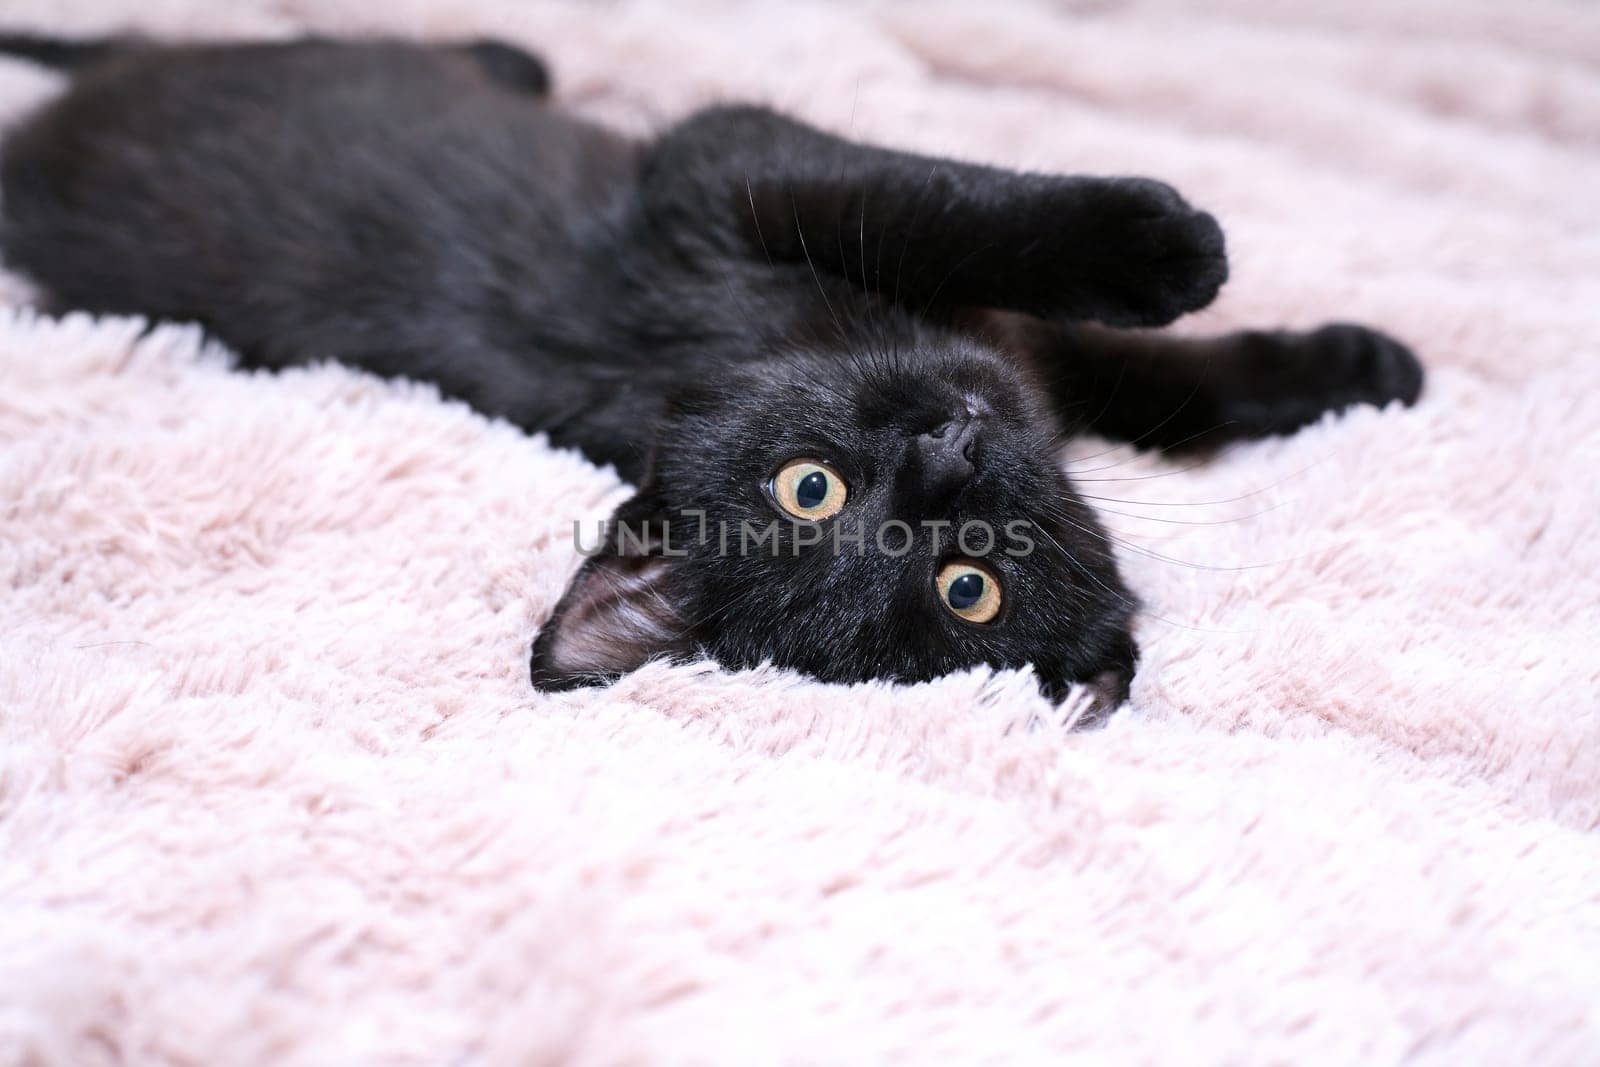 Small black kitten portrait on a fabric background